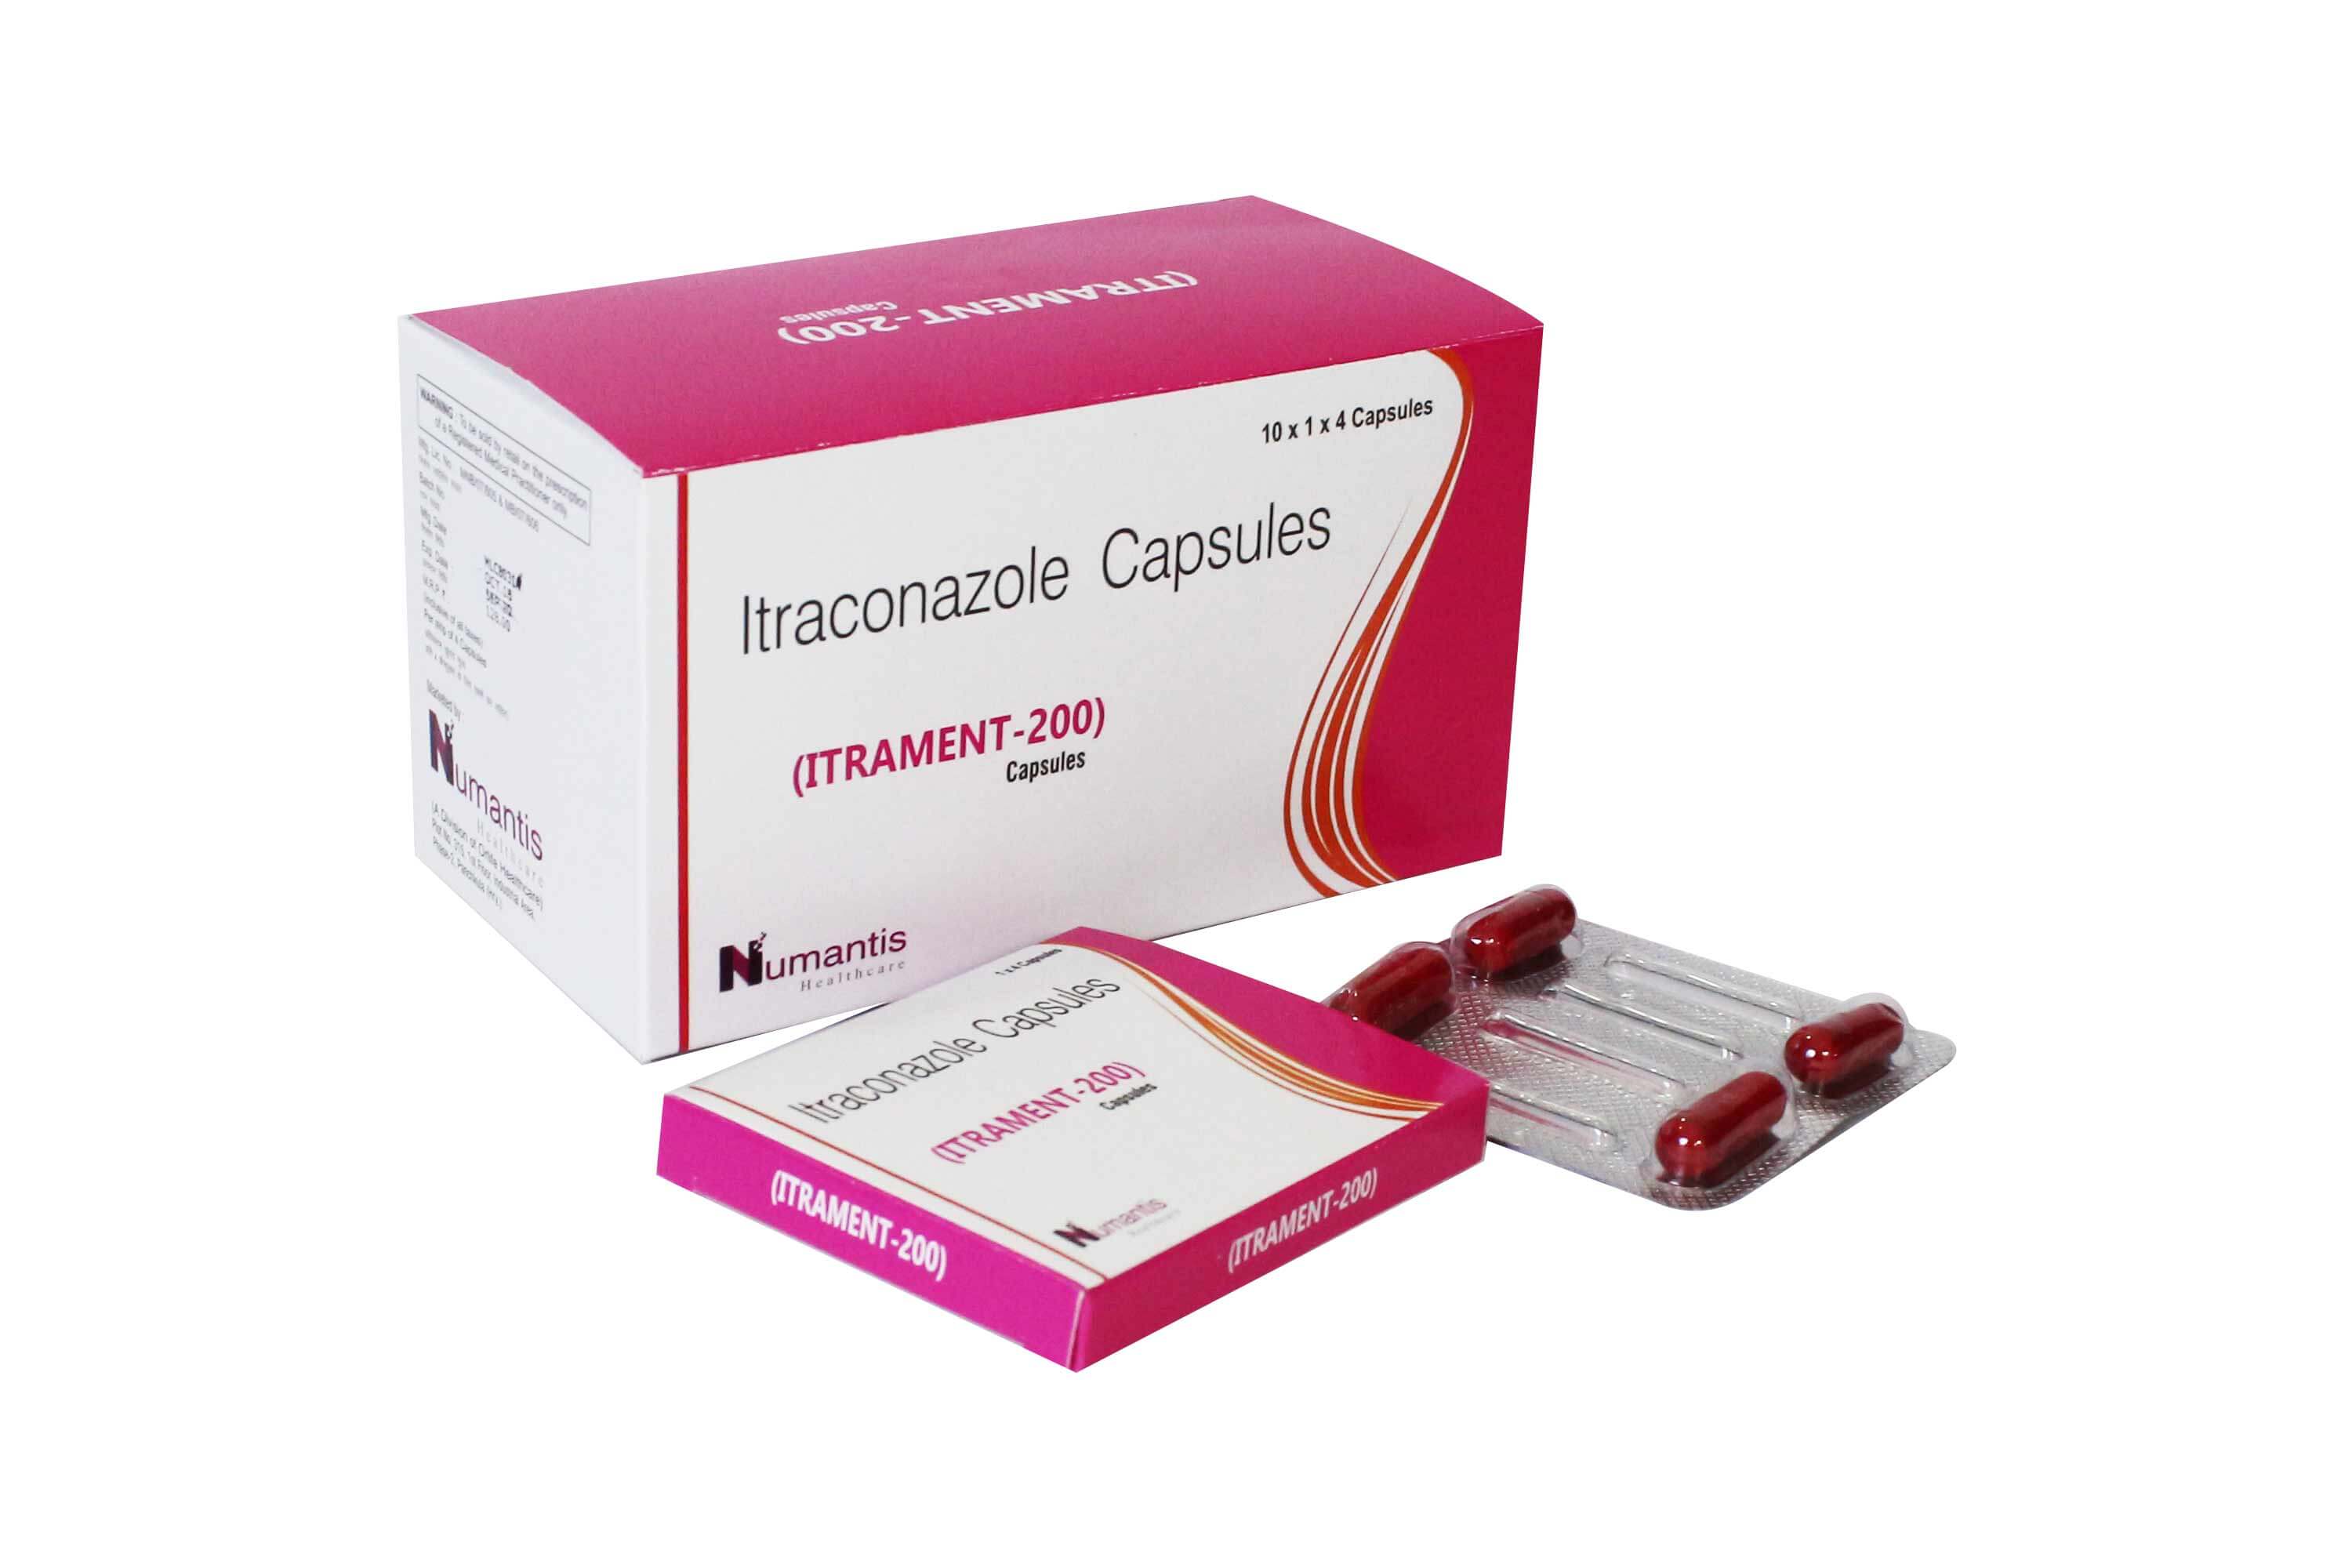 Product Name: Itrament 200, Compositions of Itrament 200 are Itraconazole Capsules  - Numantis Healthcare